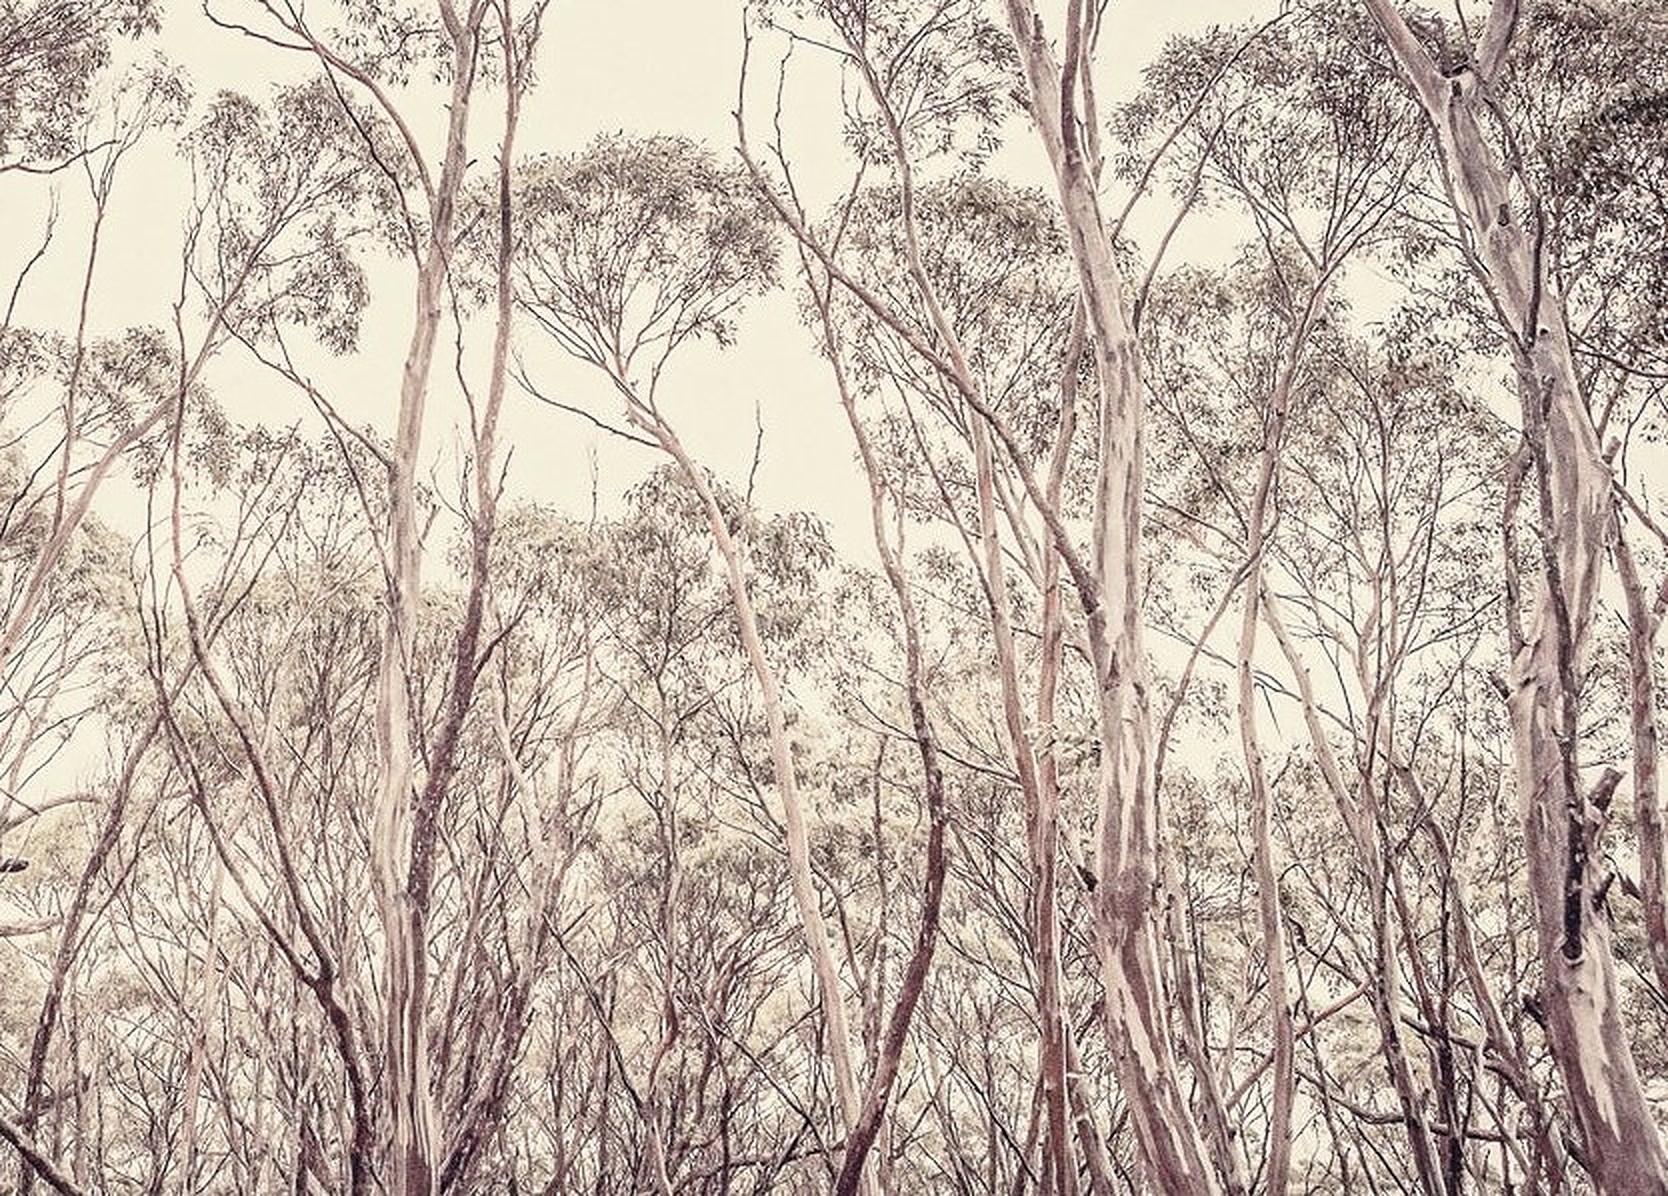 Please bear in mind that all prints are produced to order and lead times are between 15-20 days.

Eucalyptus II is a stunning Archival Inkjet Print by contemporary photographer Morgan Silk. 
It is available in this size in an Edition of 25, and is